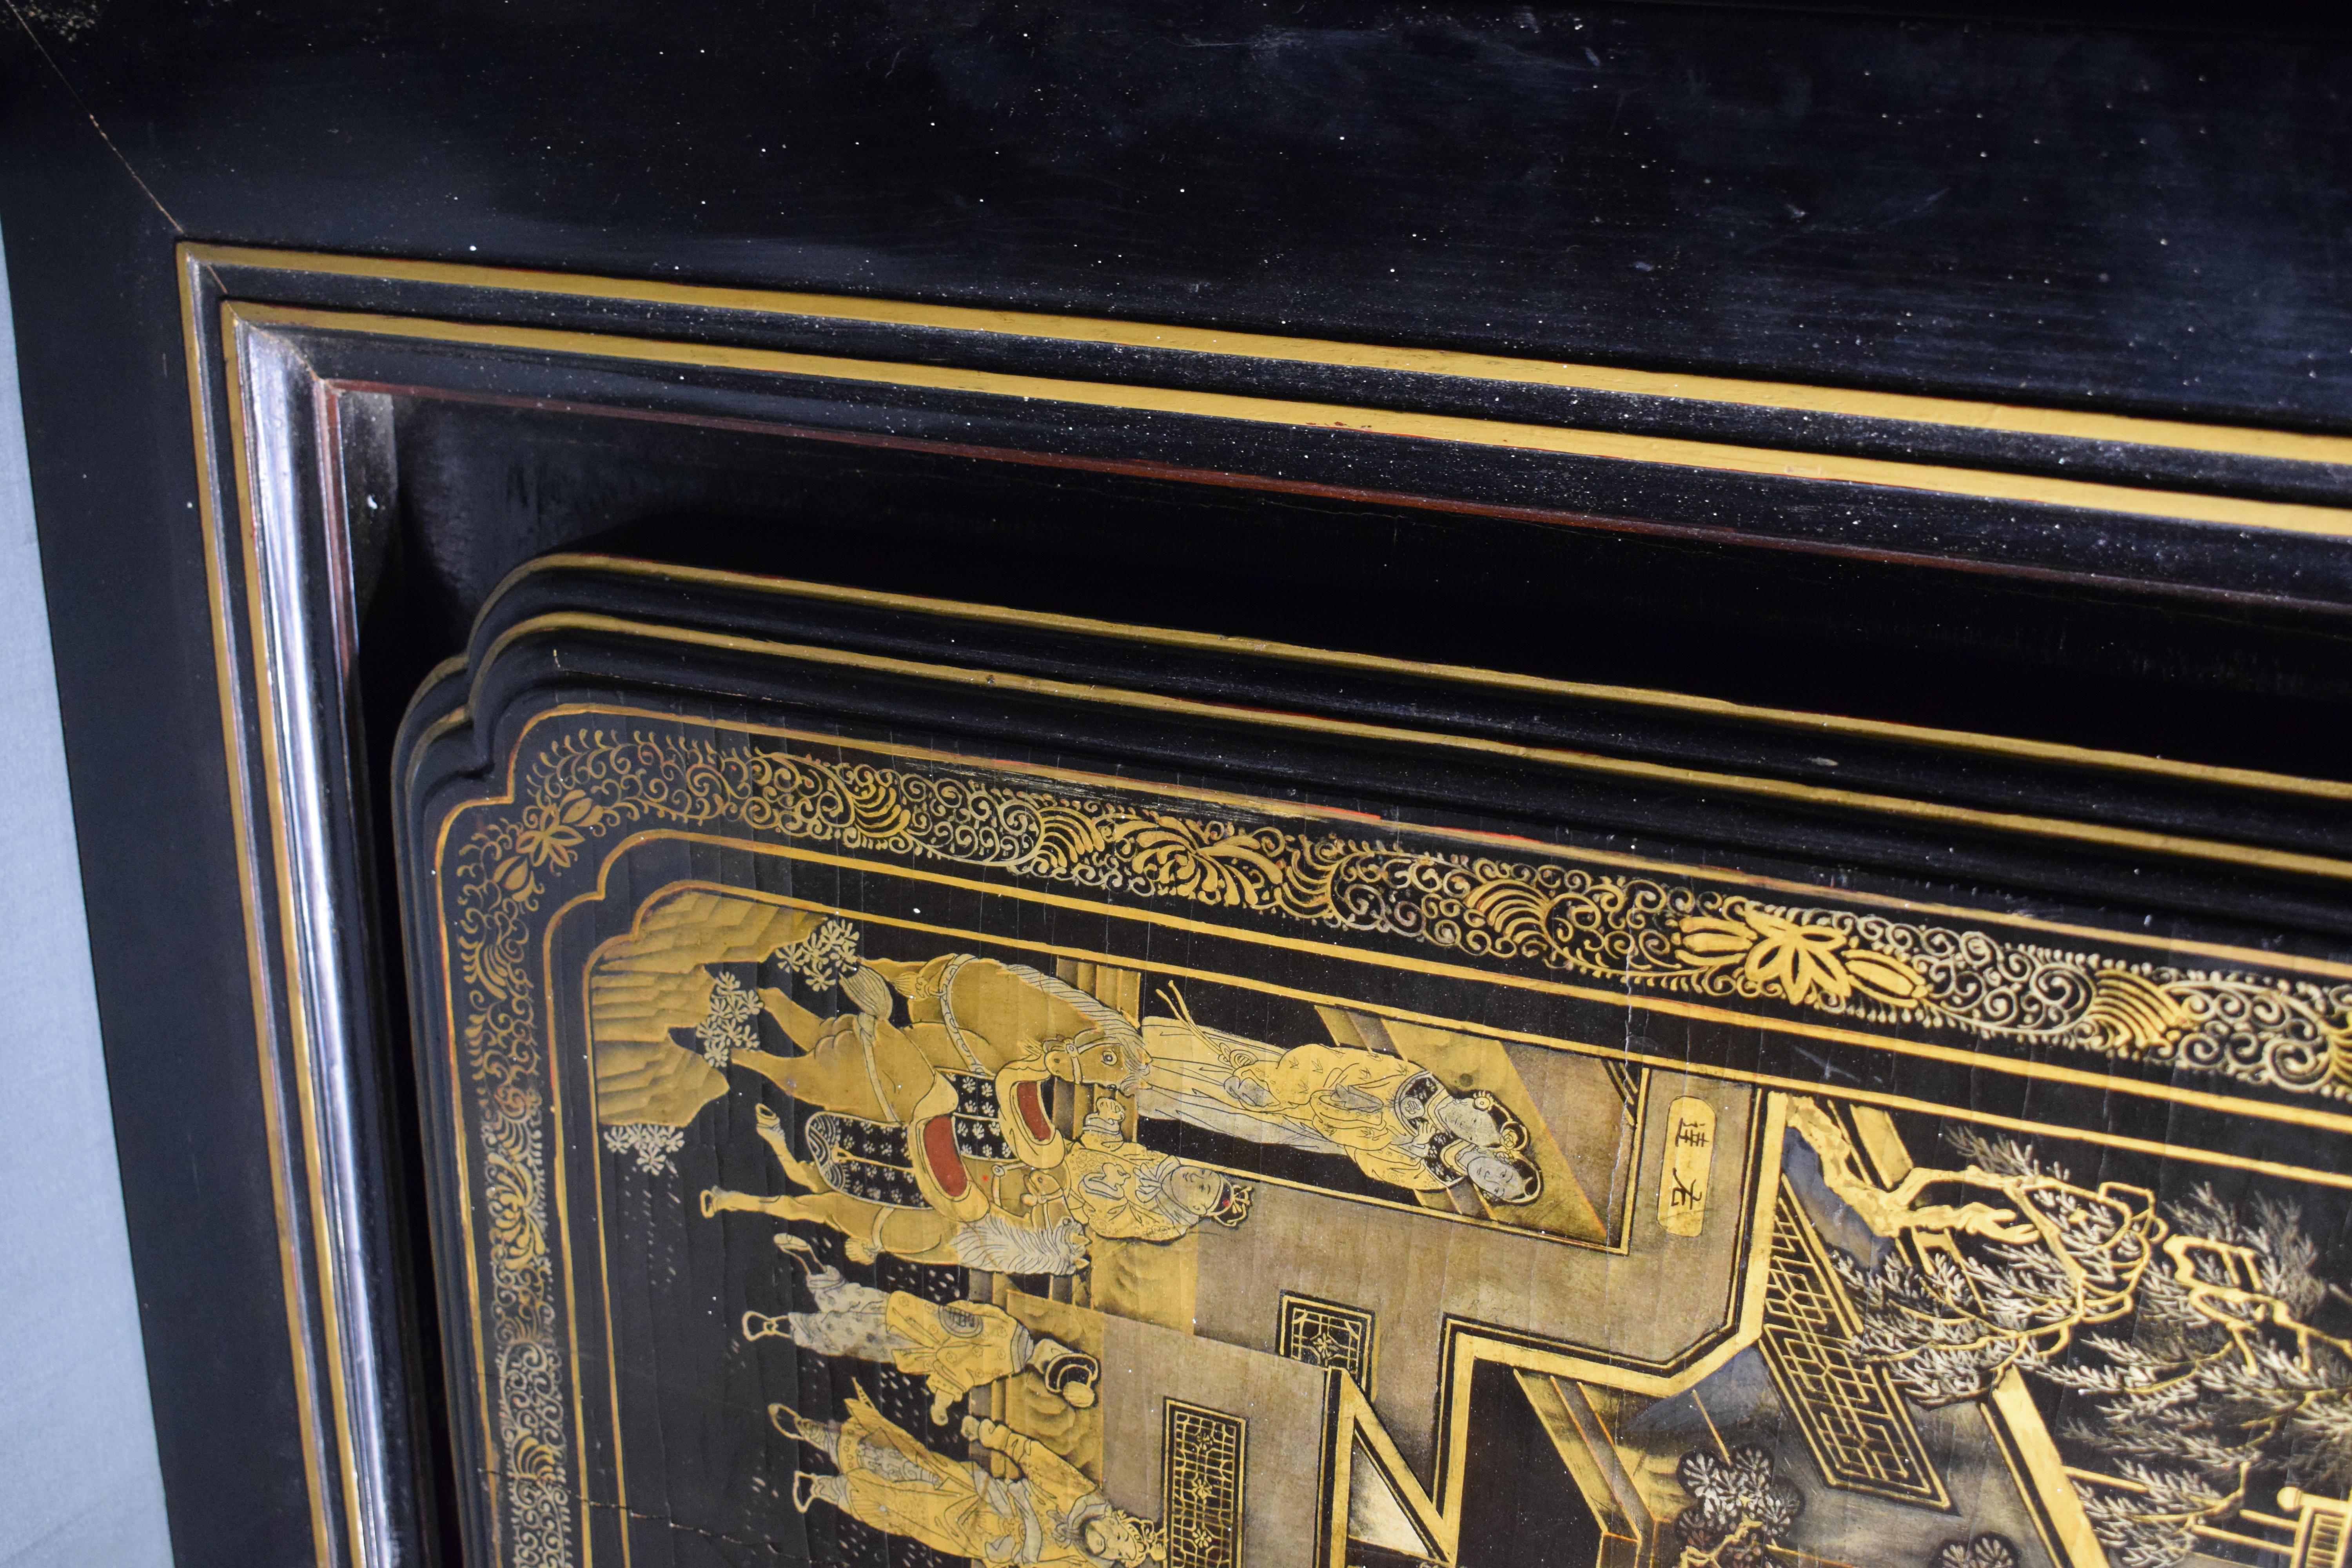 Wood Chinese Export Gilt-Decorated Black Lacquer Panel